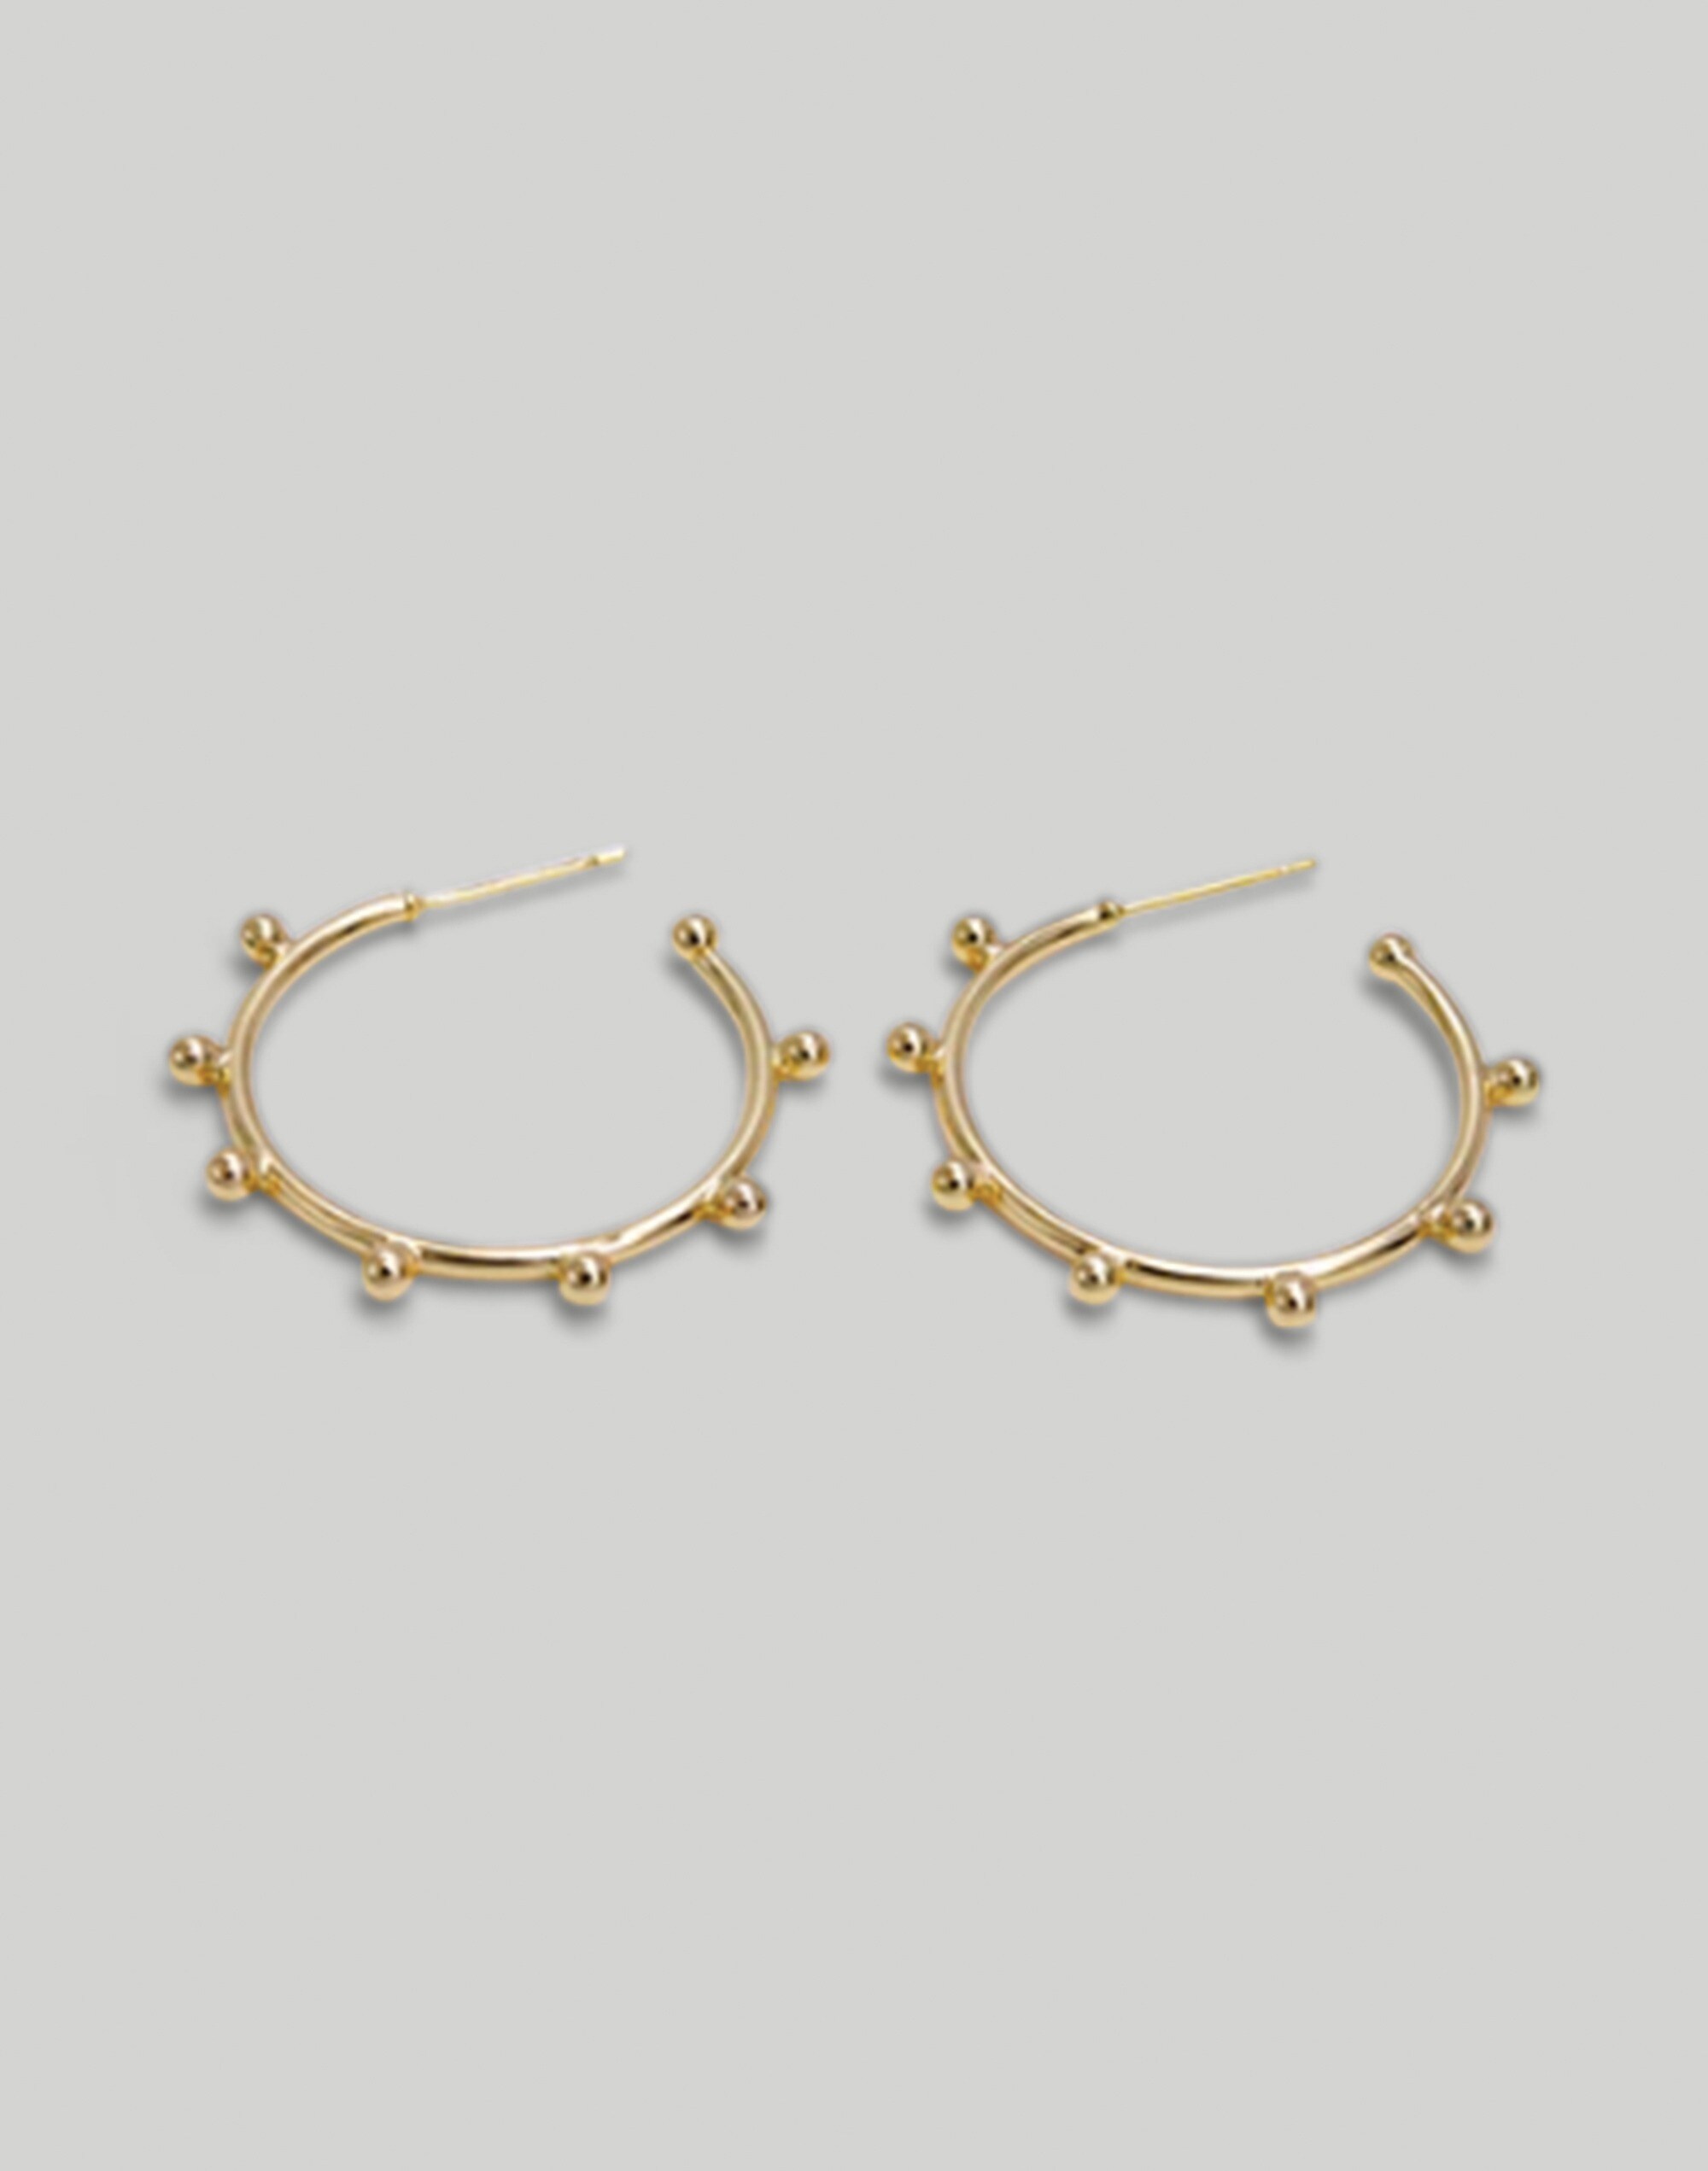 Abcrete & Co. The Dotted Hoops